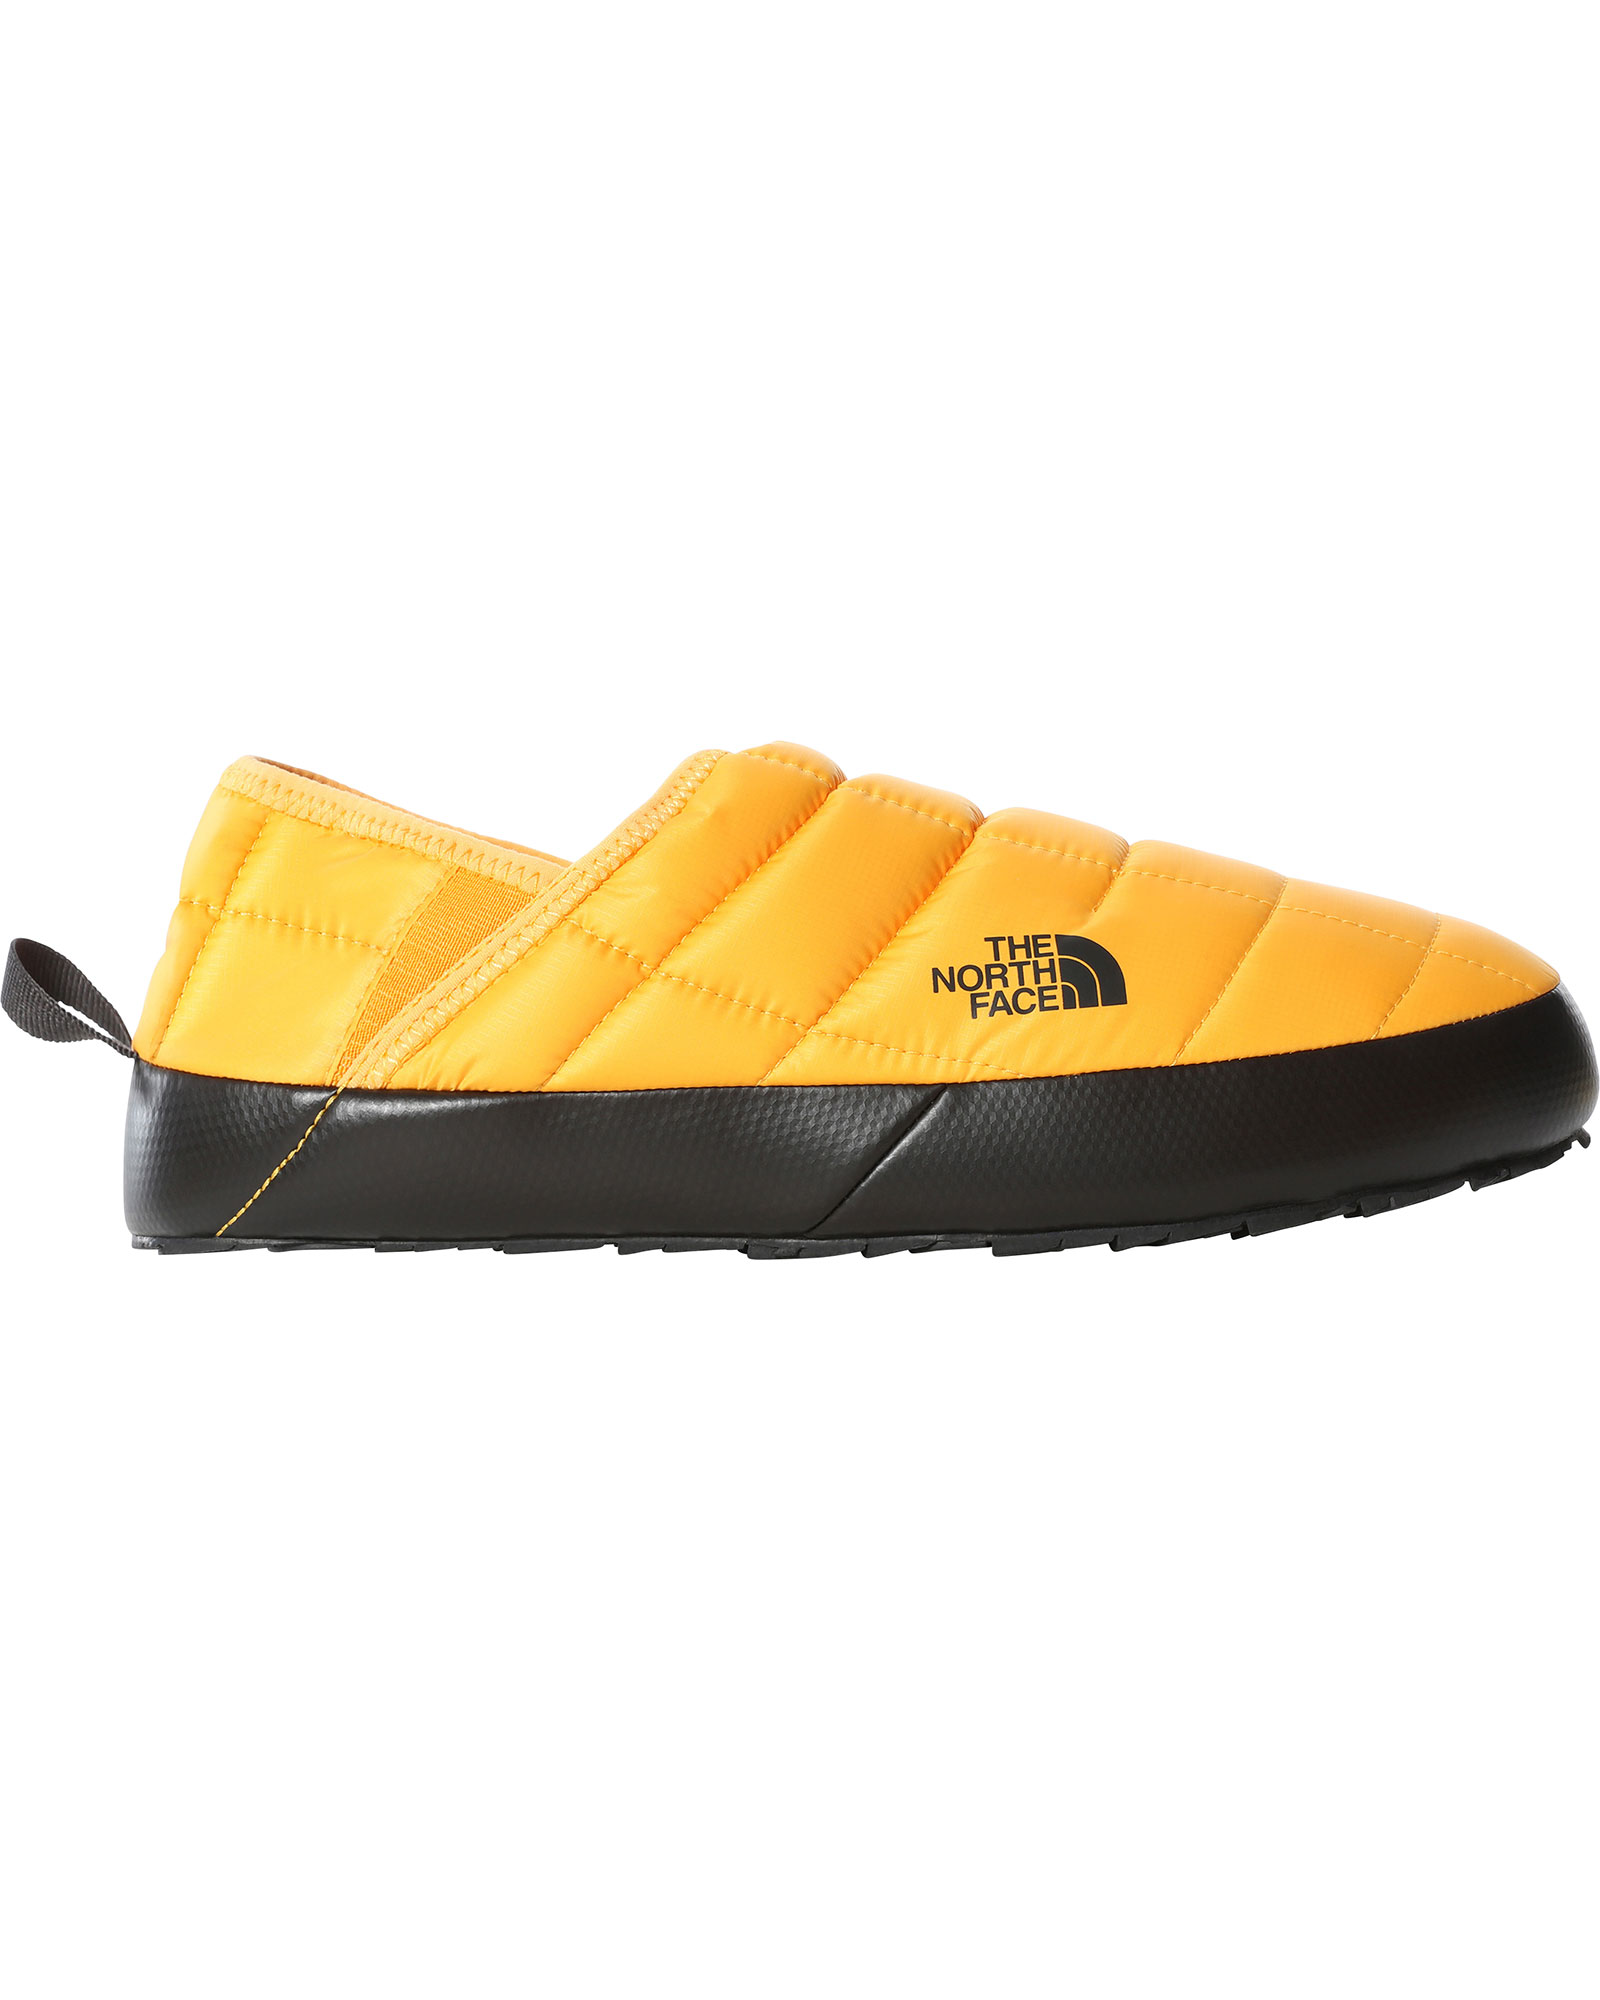 The North Face Men’s ThermoBall V Traction Mules - Summit Gold/TNF Black UK 10